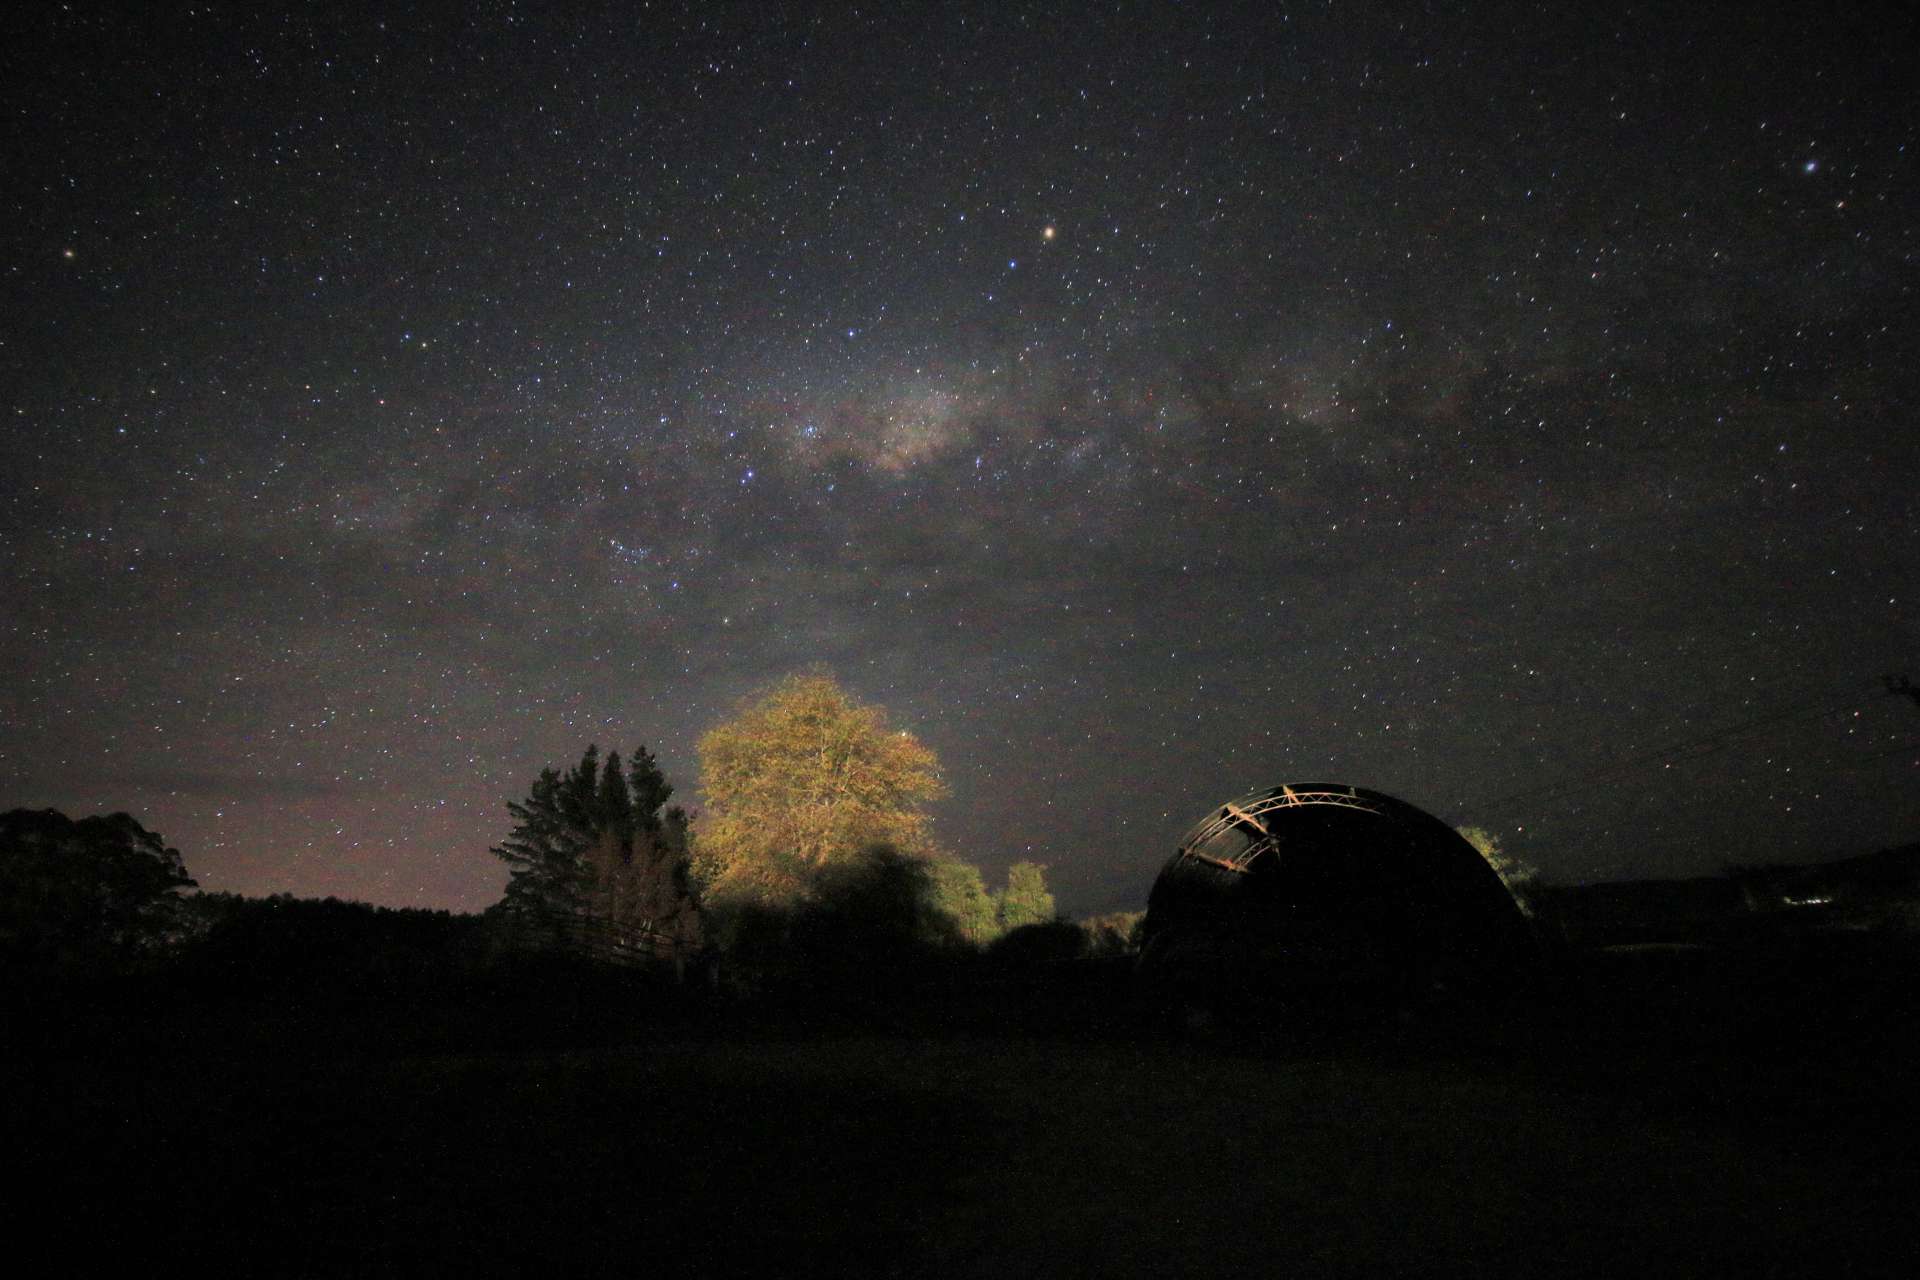 My first photo of the Milky Way